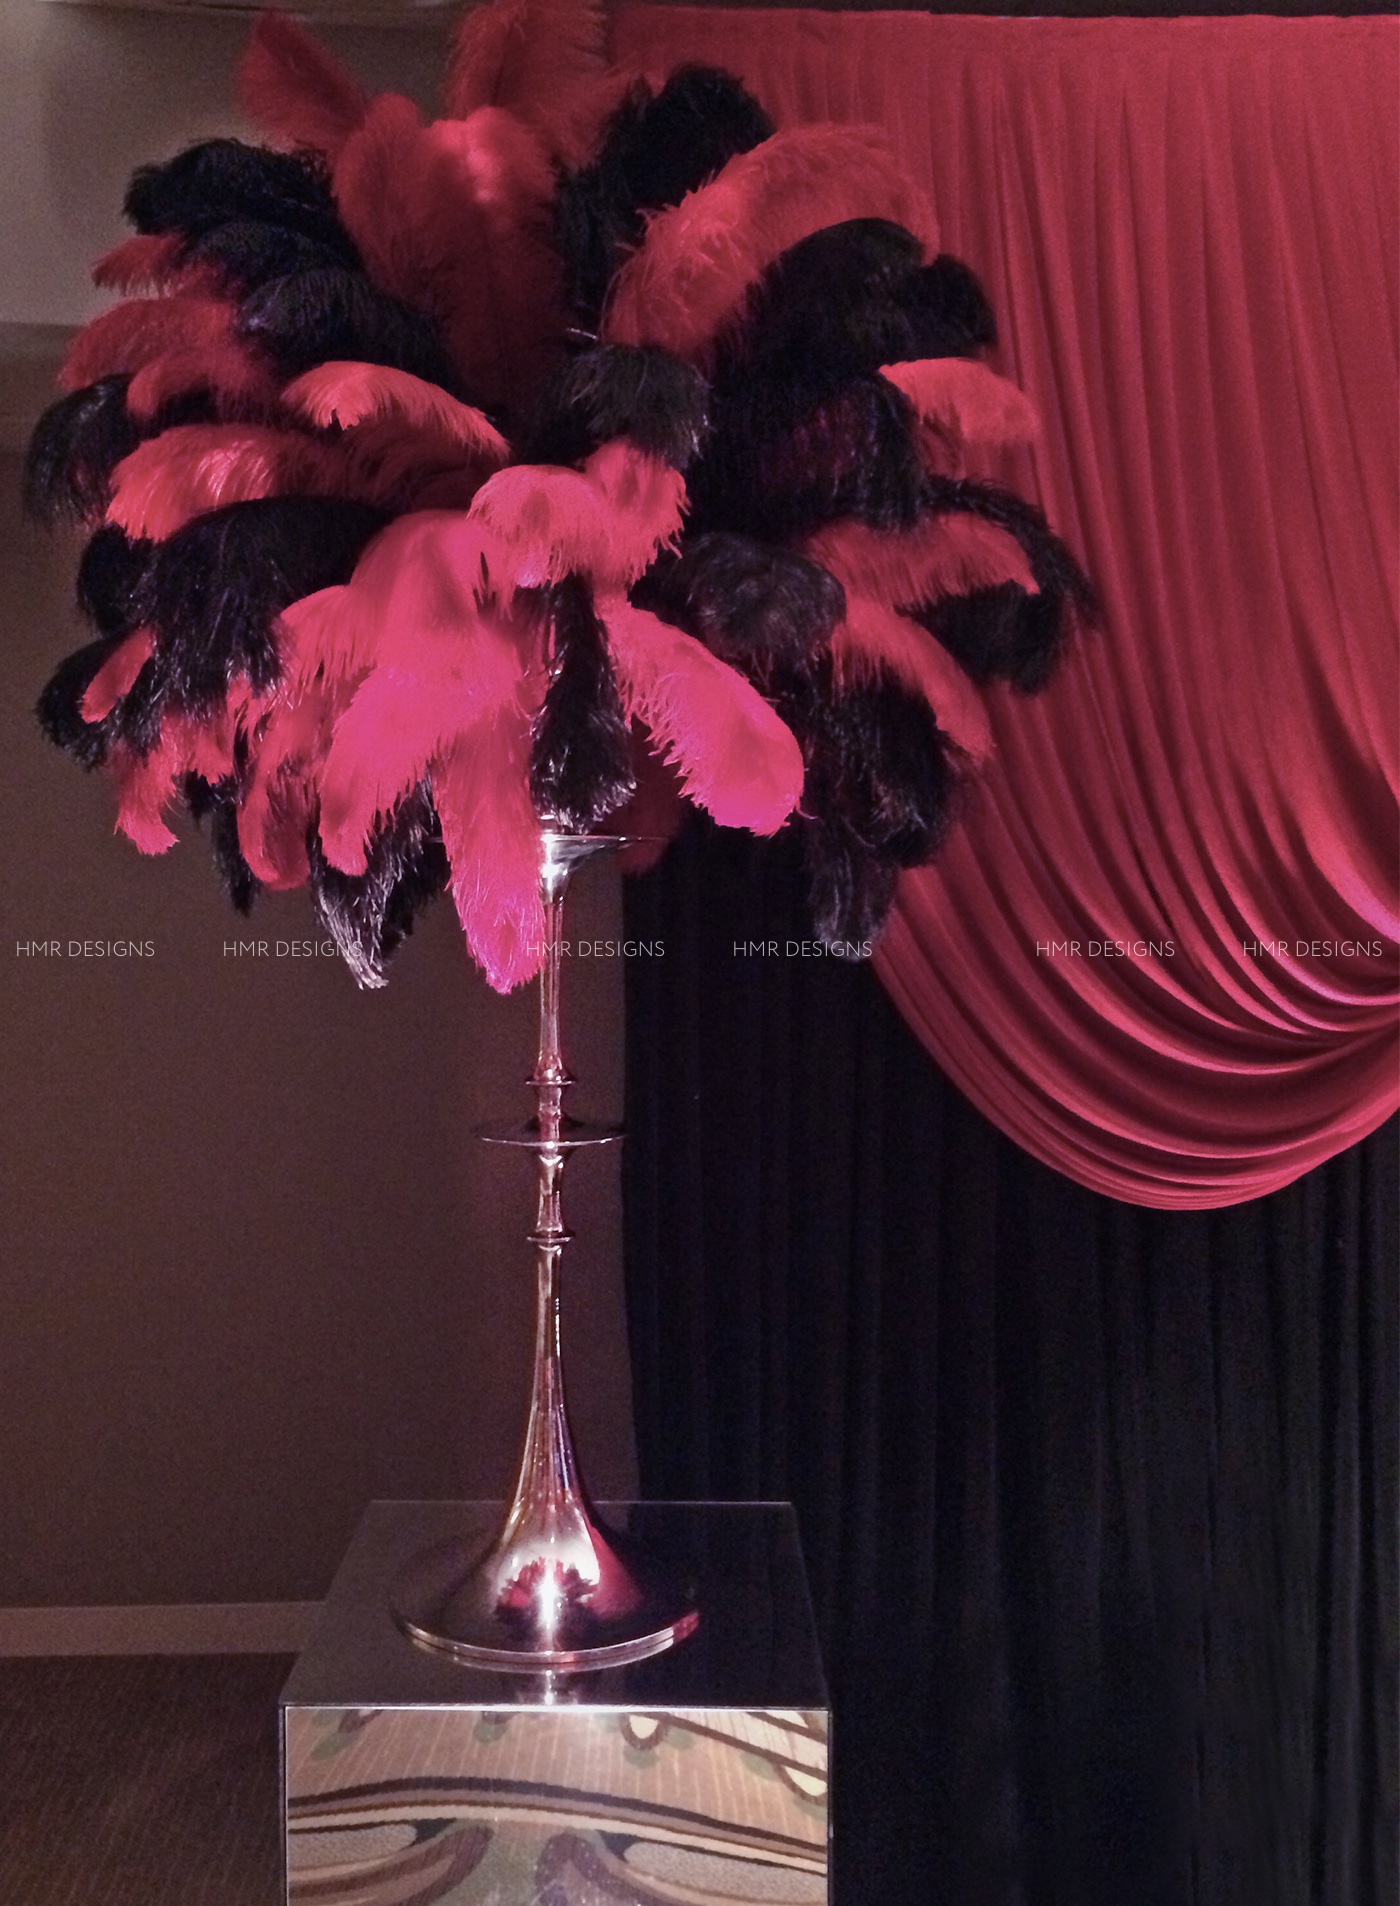 Red and black feathers burst from sleek silver bases for corporate centerpieces designed by HMR Designs